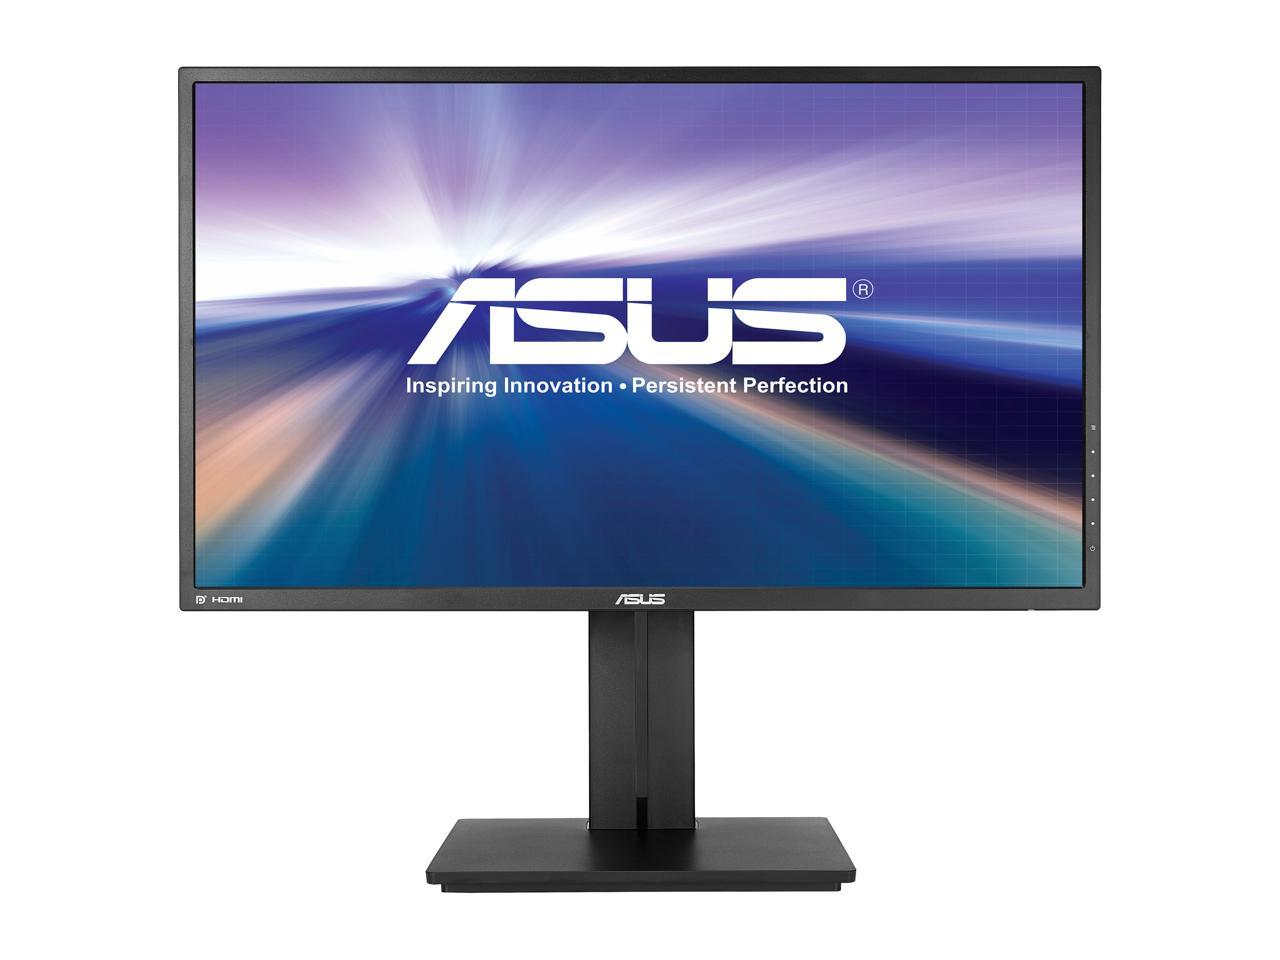 ASUS PB277Q 27" WQHD 2560 x 1440 2K Resolution 1ms (GTG) 75Hz HDMI VGA DisplayPort DVI-D Asus Eye Care with Ultra Low-Blue Light & Flicker-Free Built-in Speakers Widescreen Backlit LED LCD Monitor